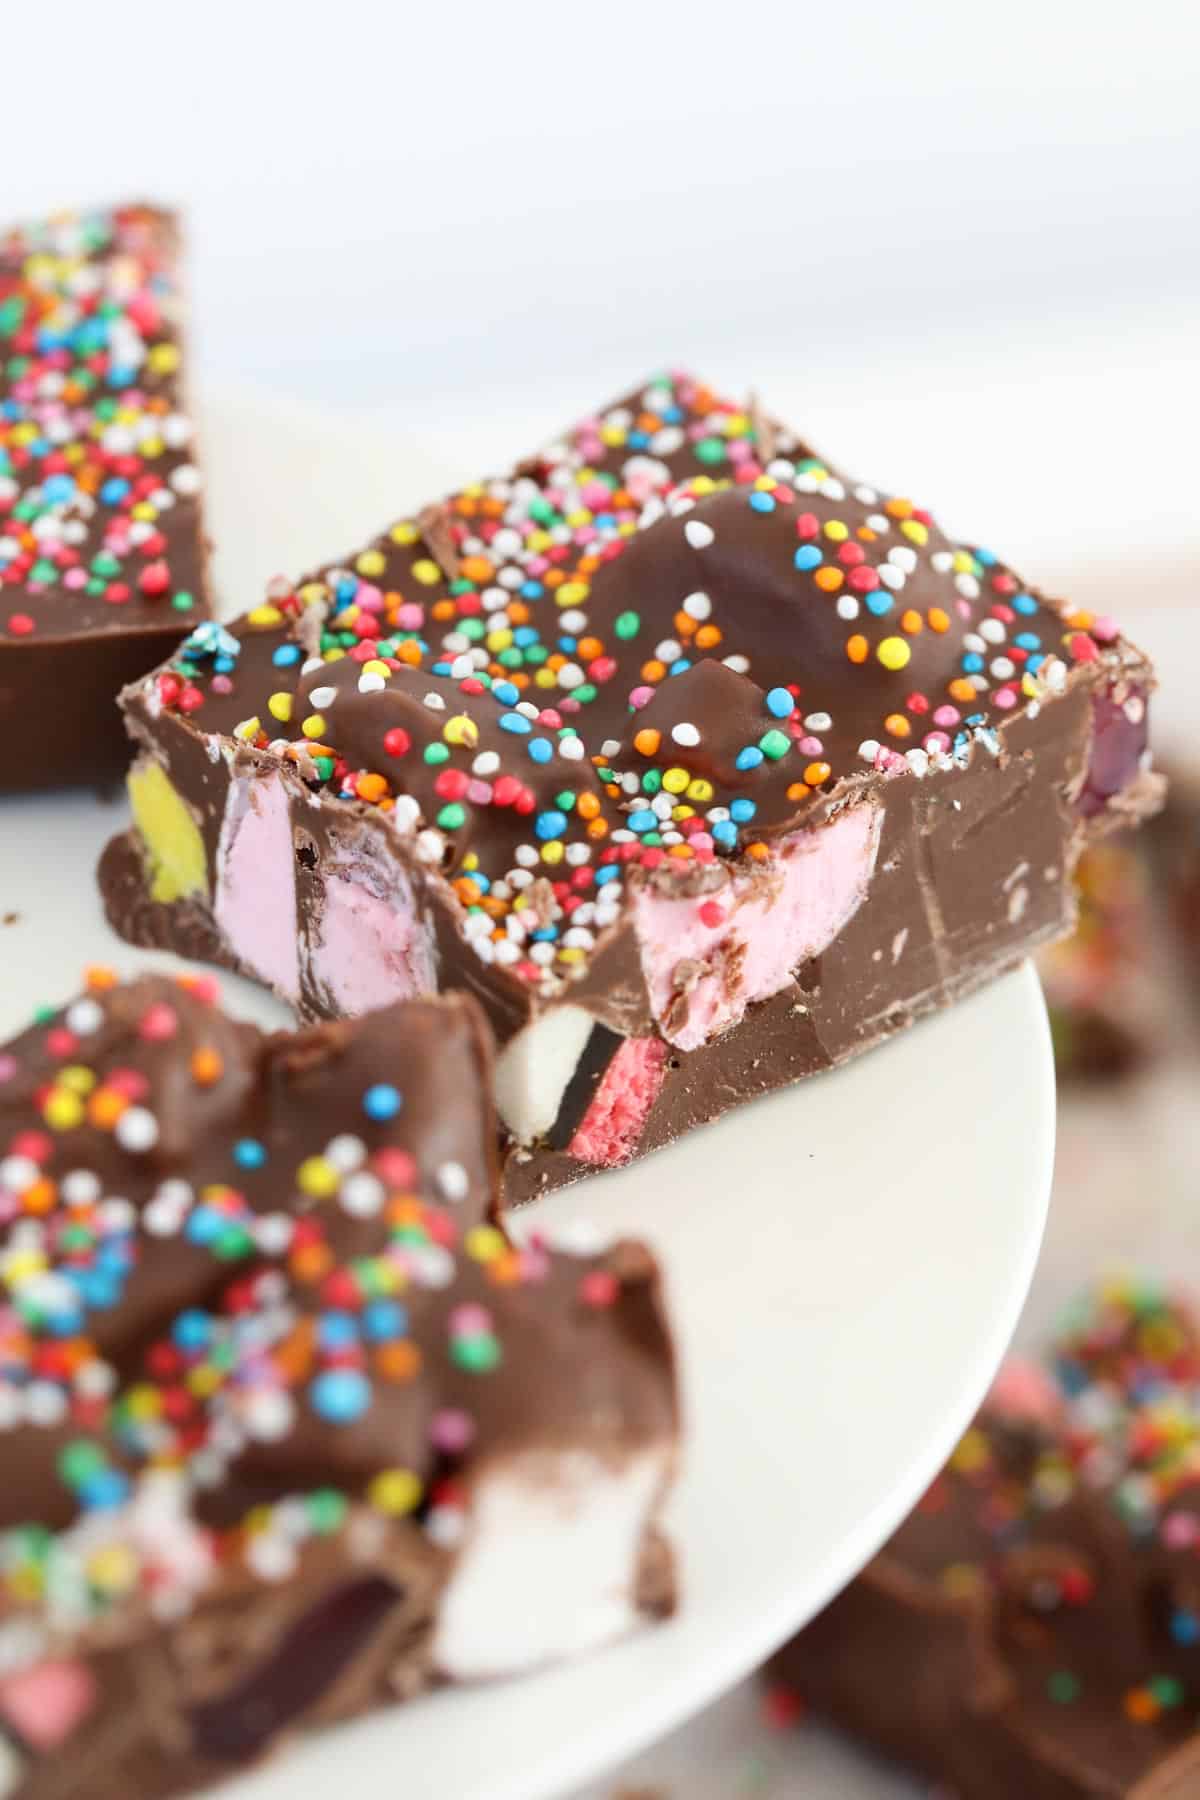 Pieces of rocky road with marshmallows, licorice allsorts and sprinkles.